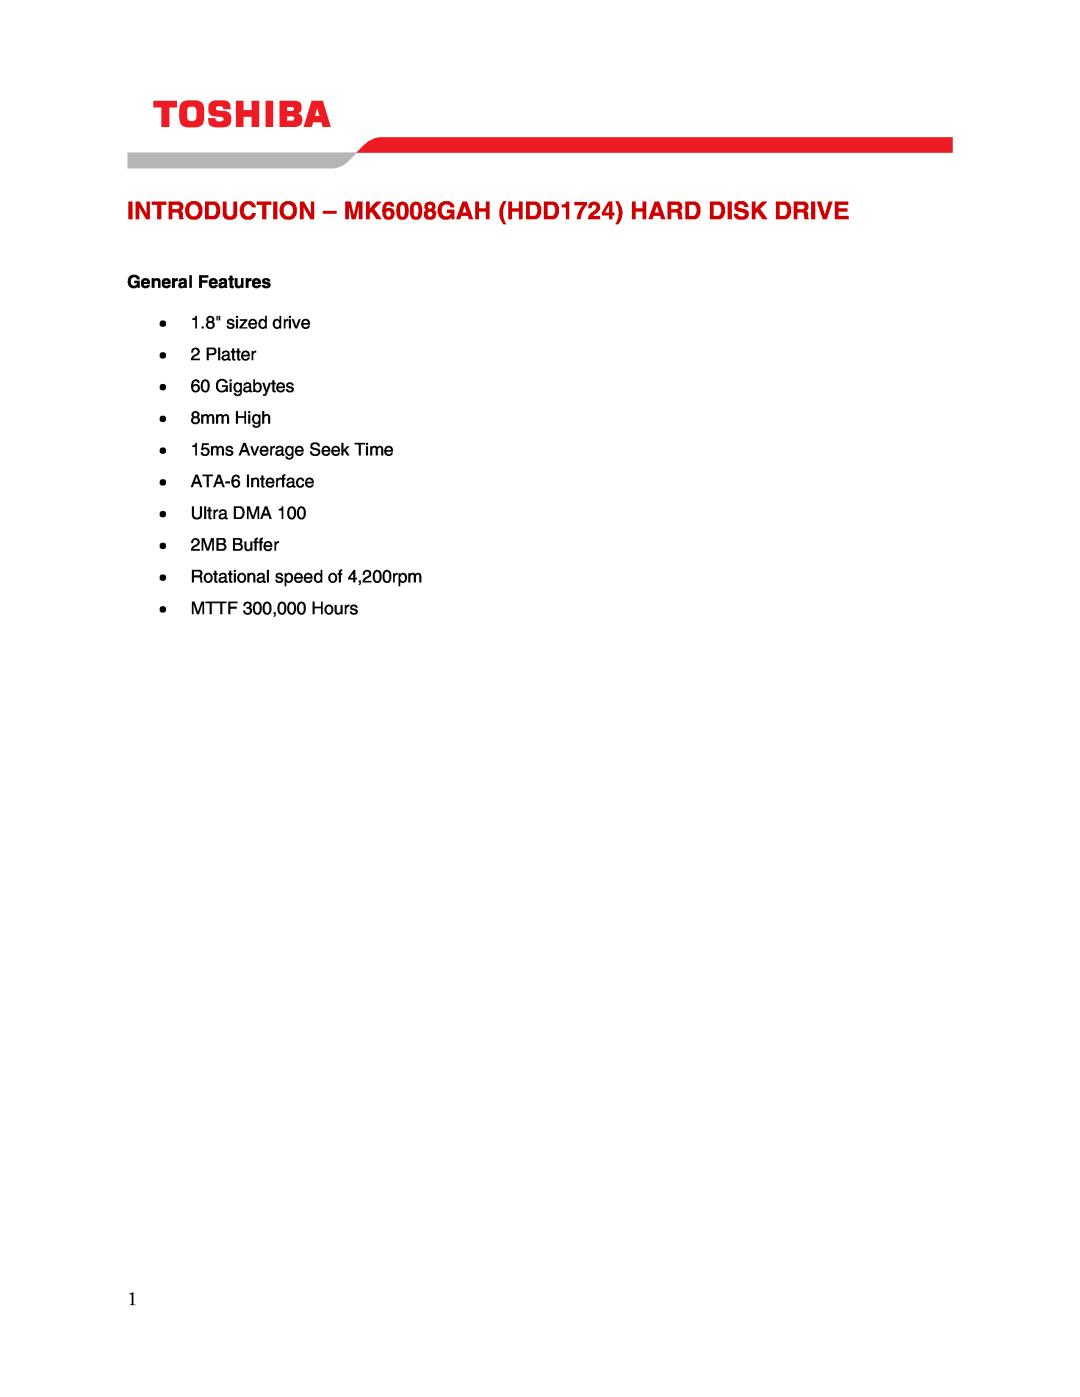 Toshiba user manual INTRODUCTION - MK6008GAH HDD1724 HARD DISK DRIVE, General Features 